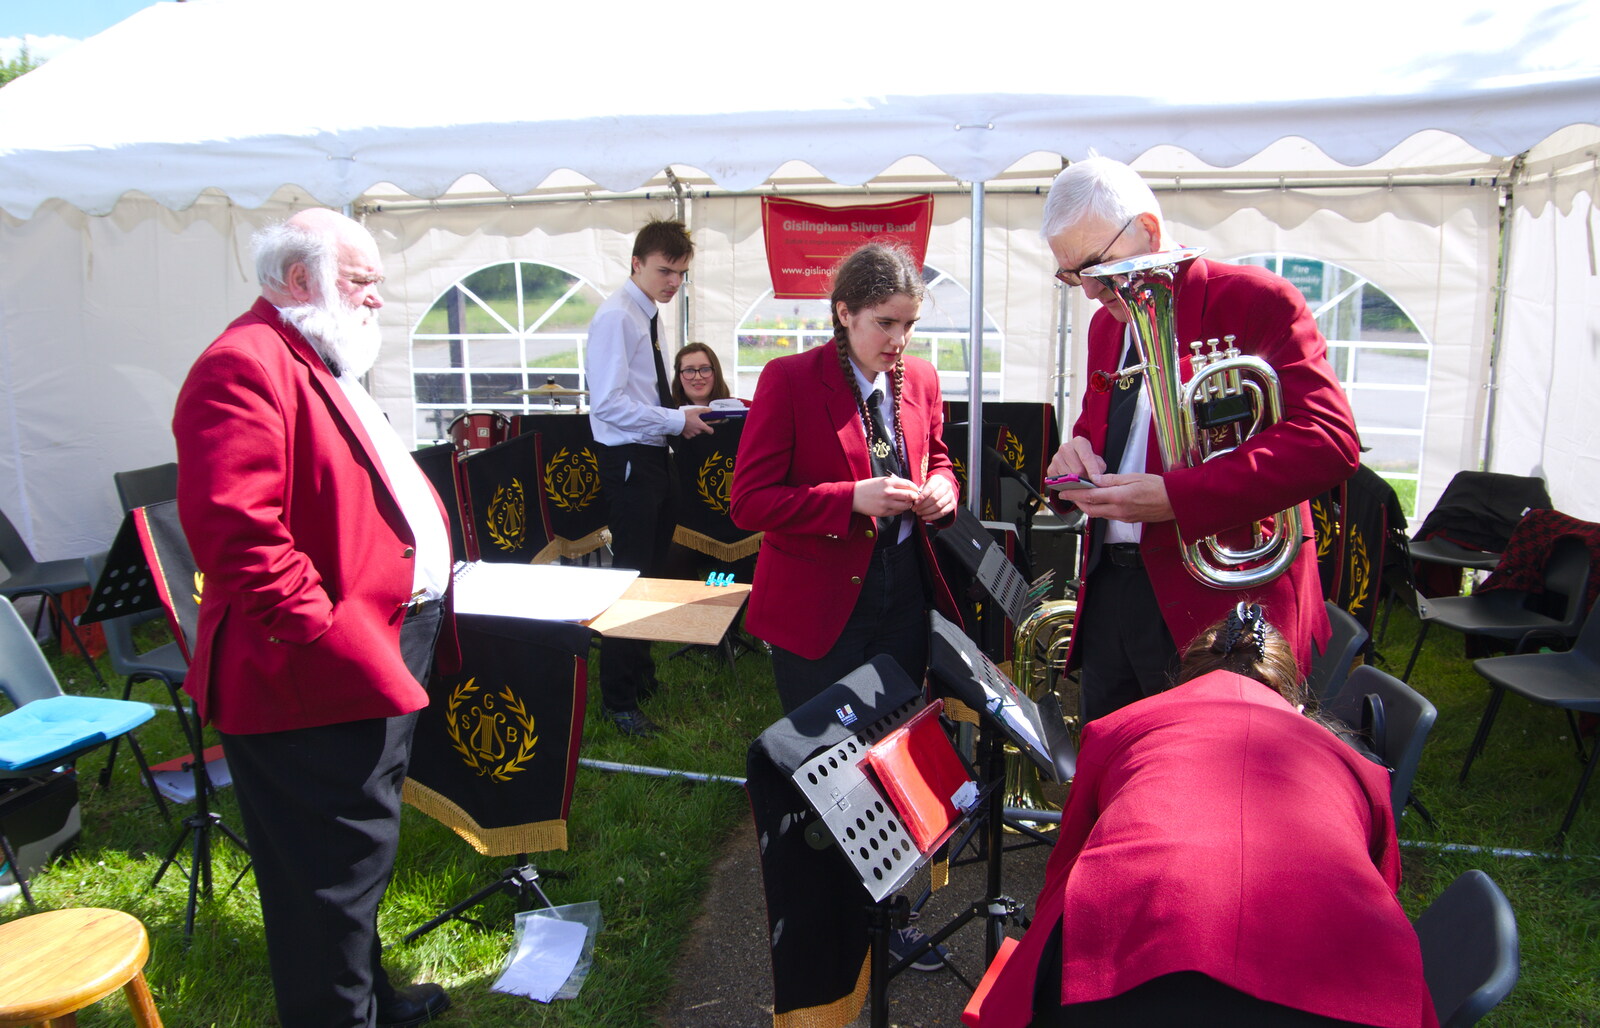 Elizabeth chats to Peter from The Gislingham Silver Band at the Village Hall, Gislingham, Suffolk - 12th May 2019